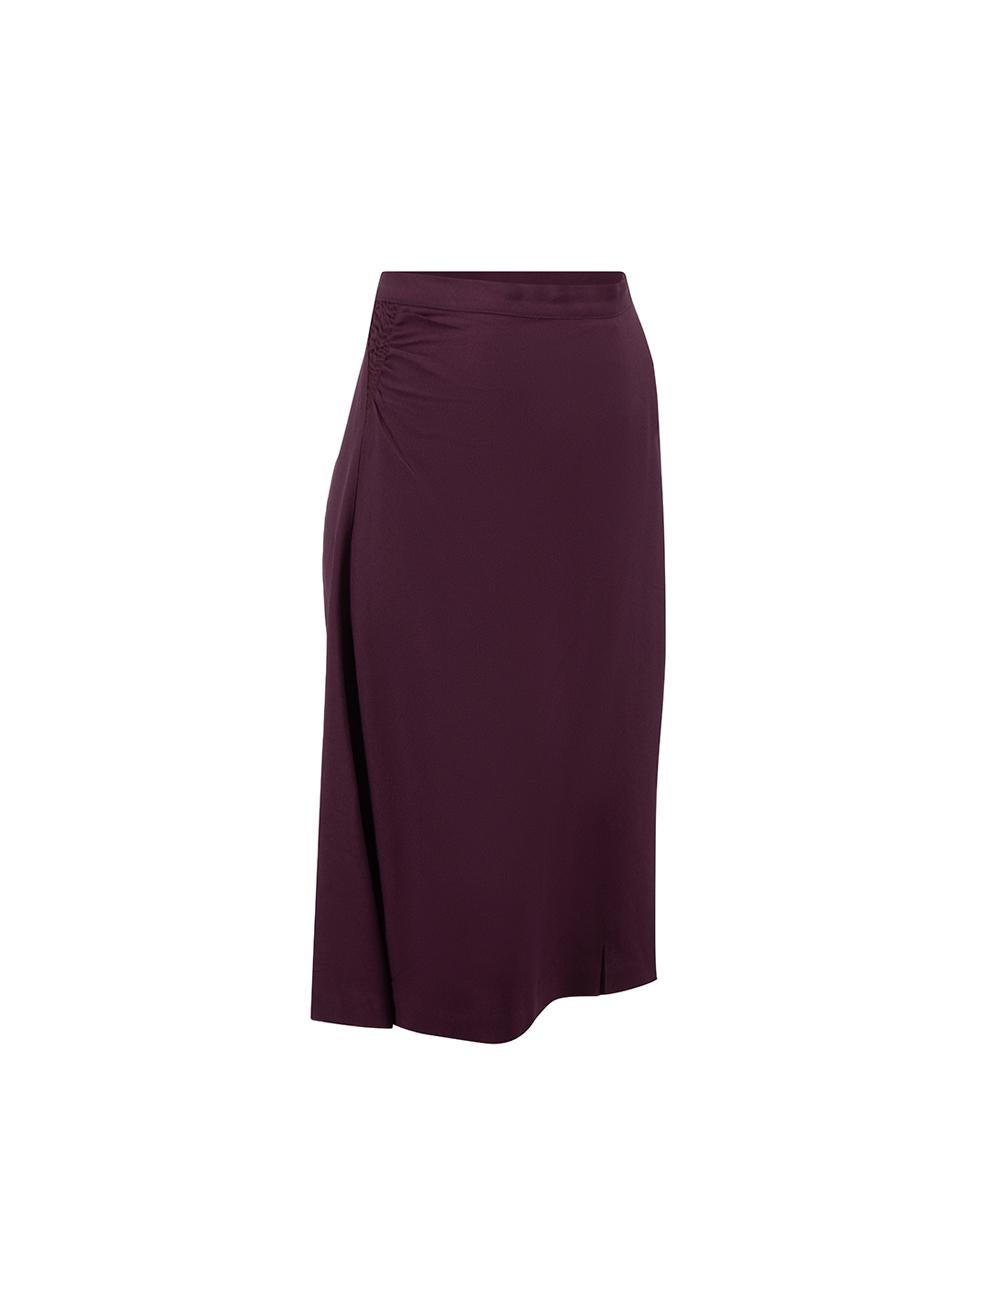 CONDITION is Very good. Minimal wear to skirt is evident. Minimal wear to the rear zip fastening with small hole at the base on this used Prada designer resale item.



Details


Aubergine purple

Synthetic

A-line skirt

Knee-length

Ruched